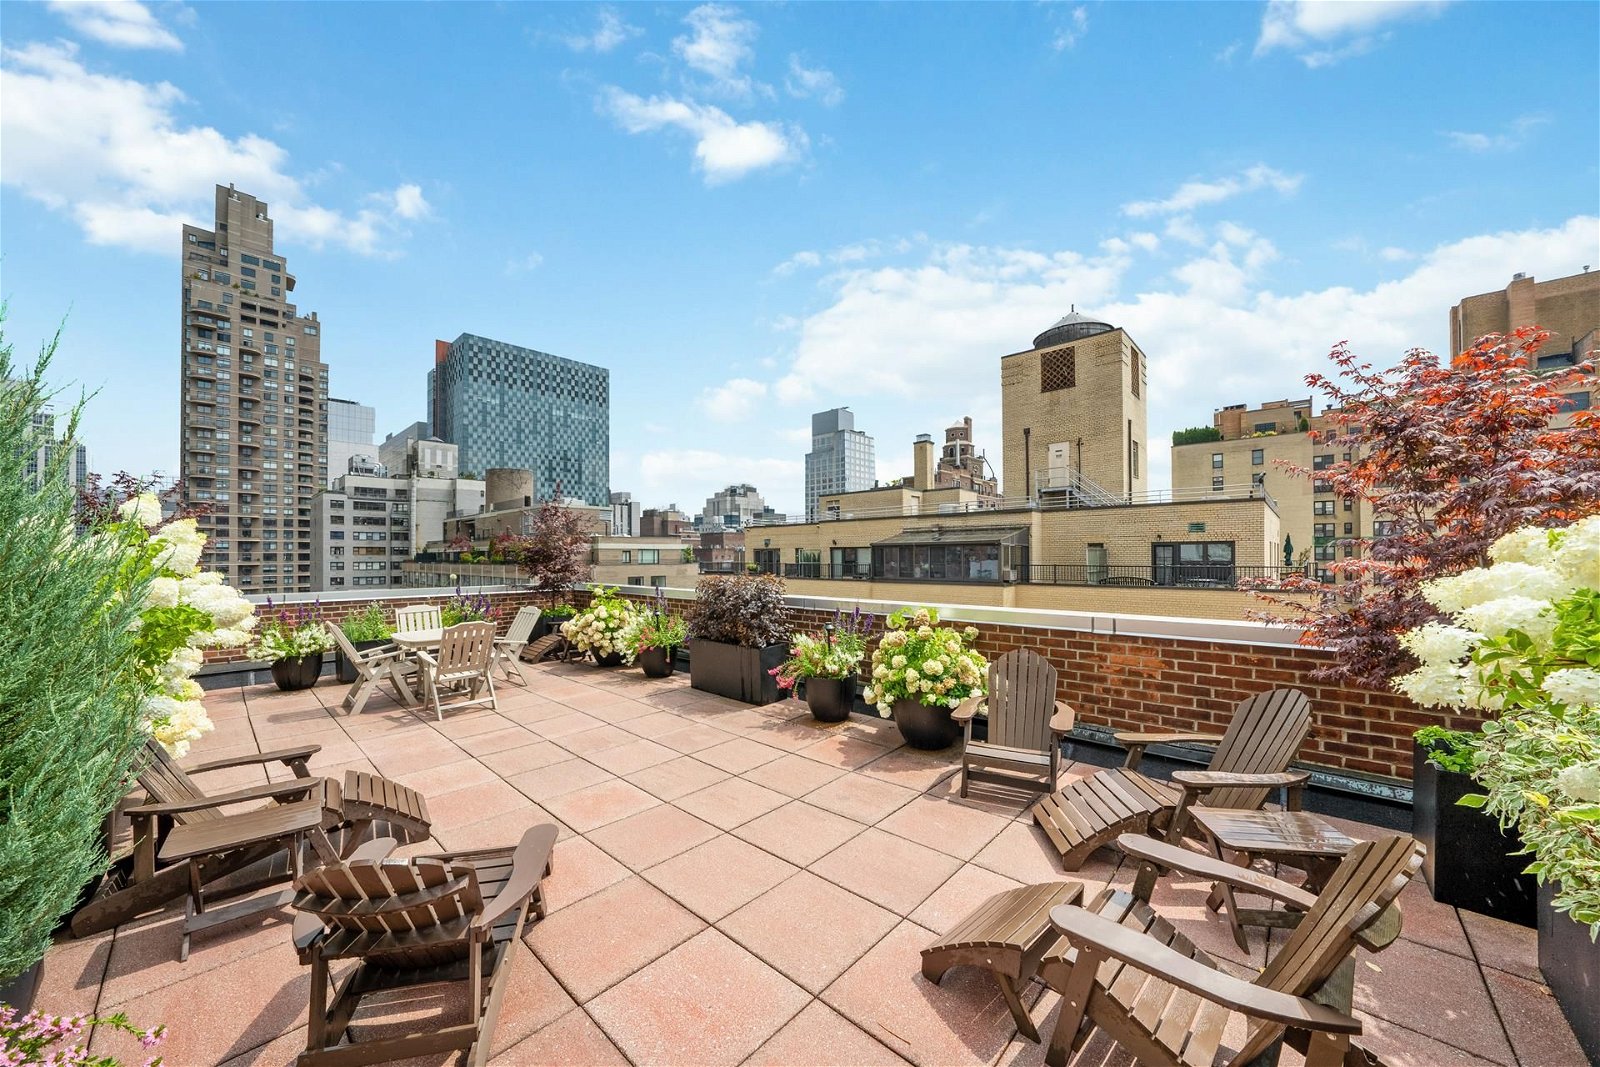 Real estate property located at 310 70th #9A, New York, New York City, NY